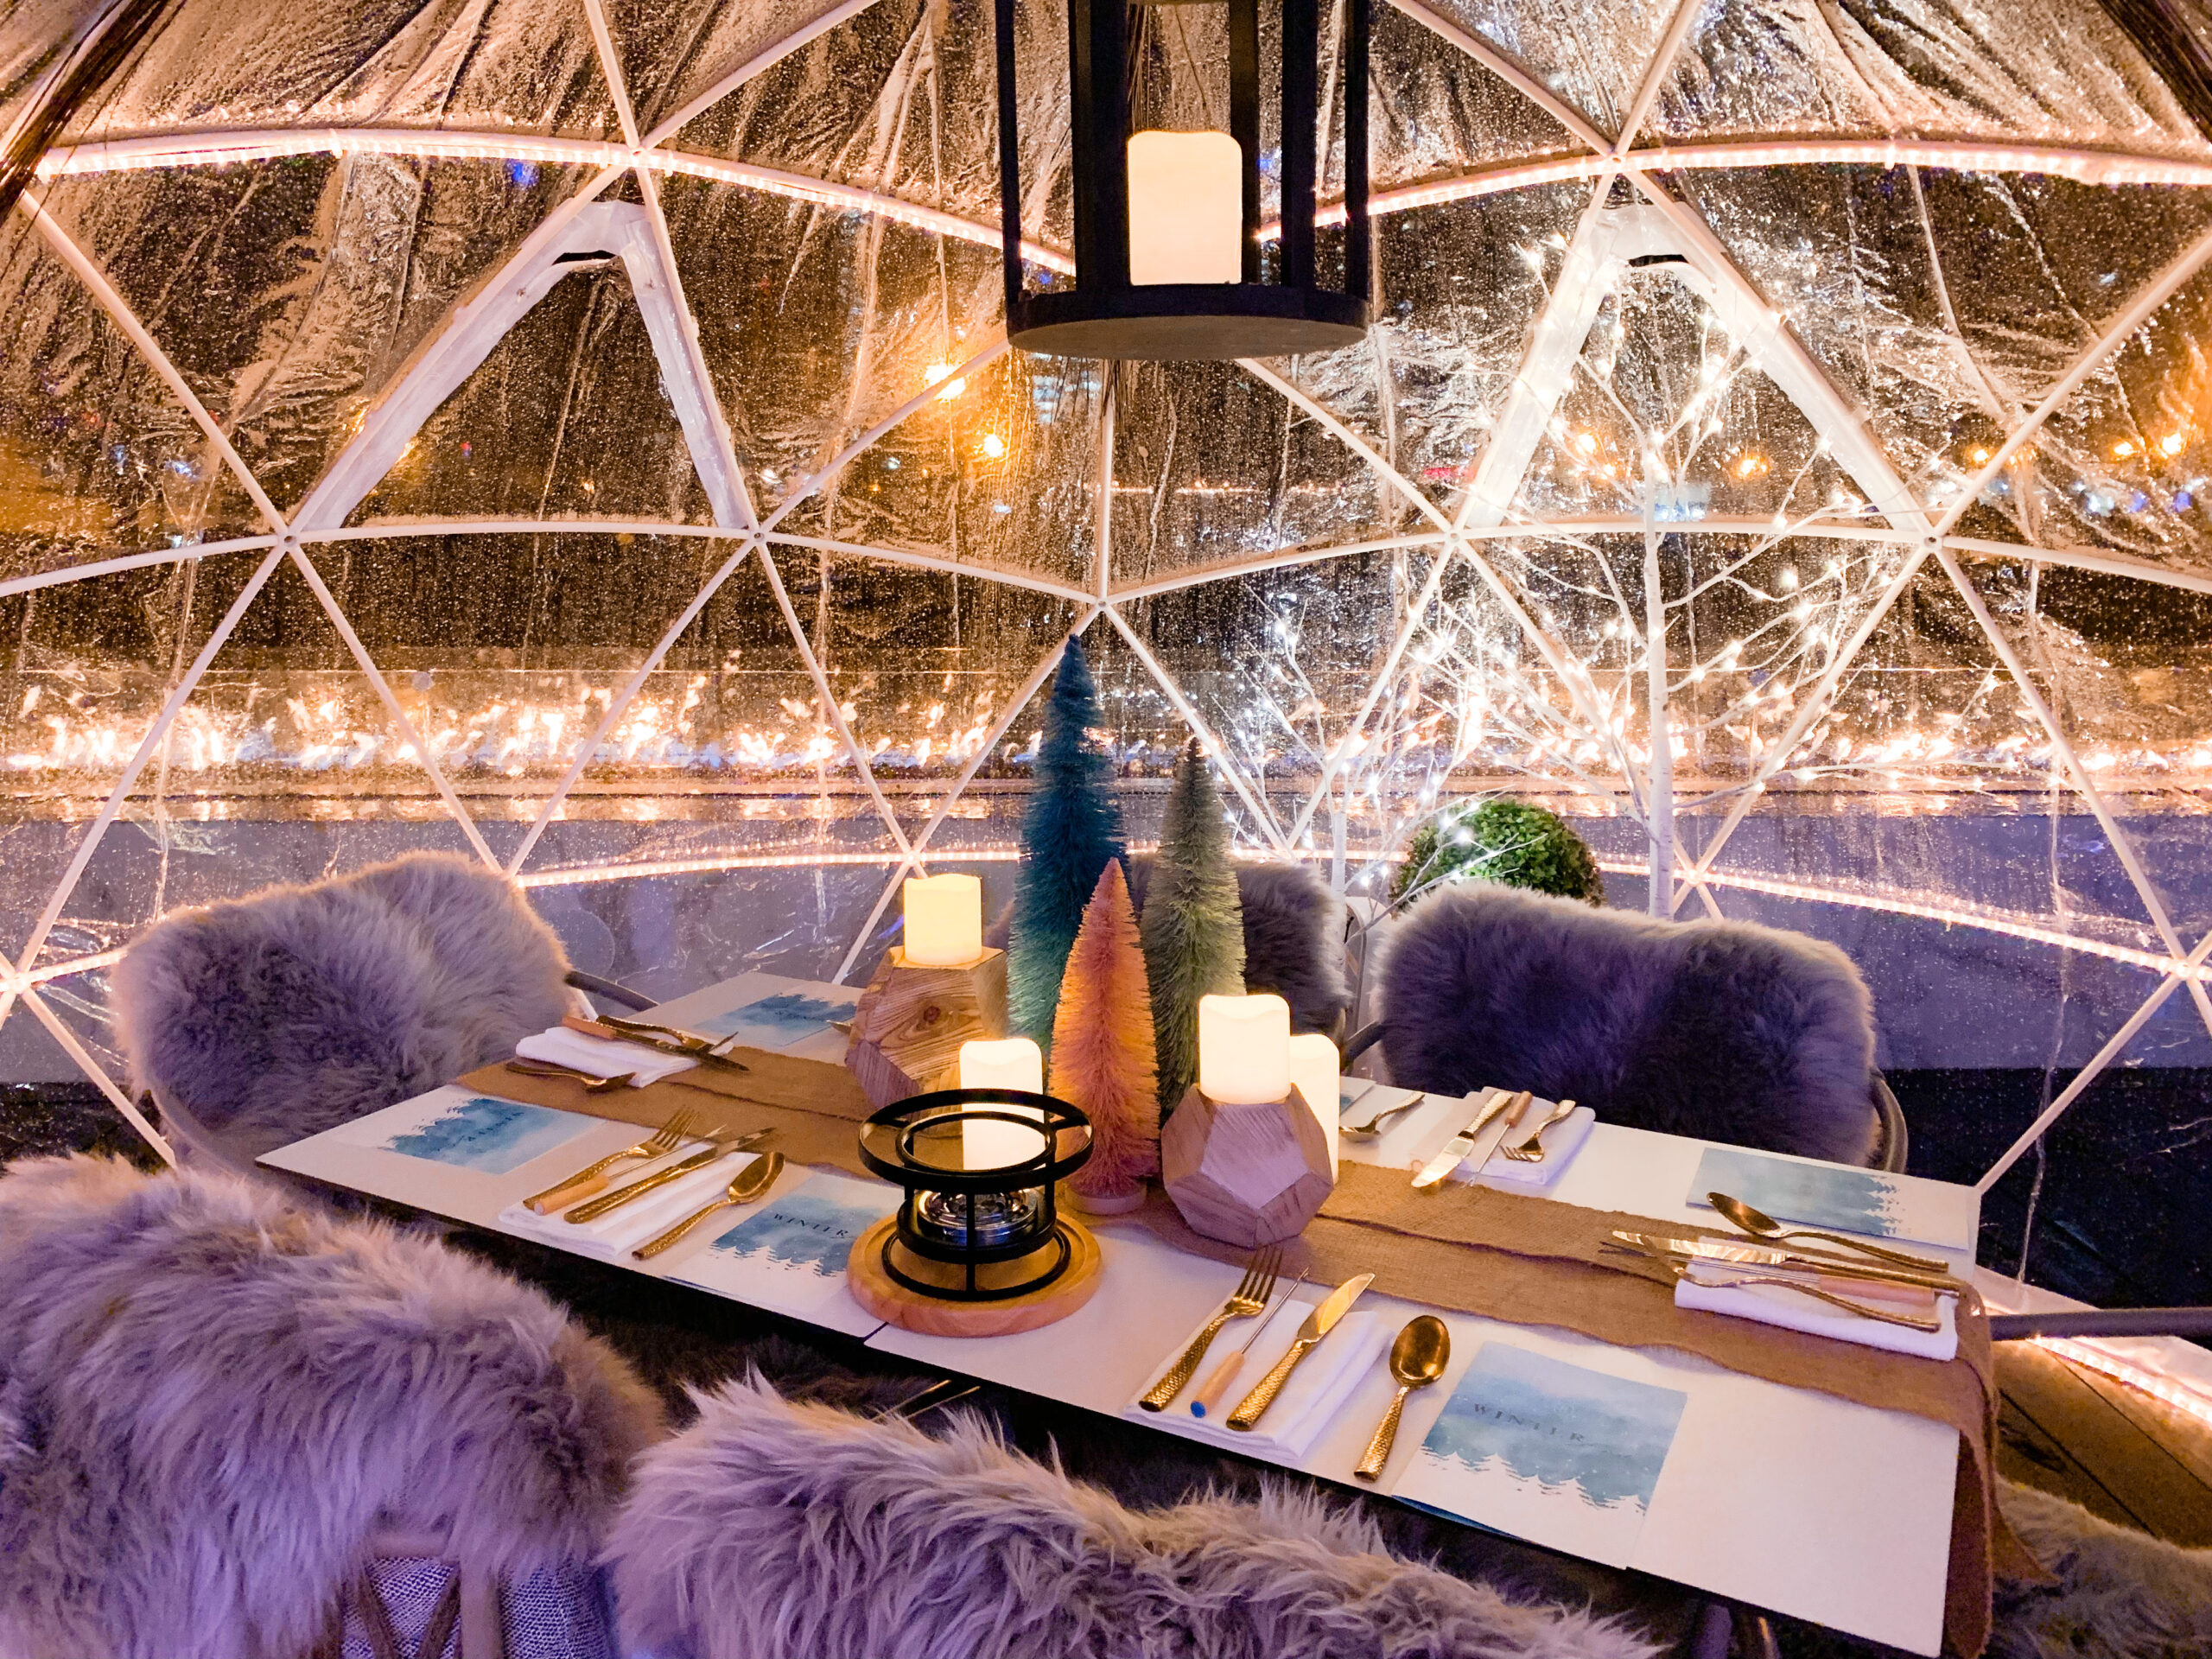 4 PLACES YOU CAN DINE INSIDE A DOME NEAR VANCOUVER